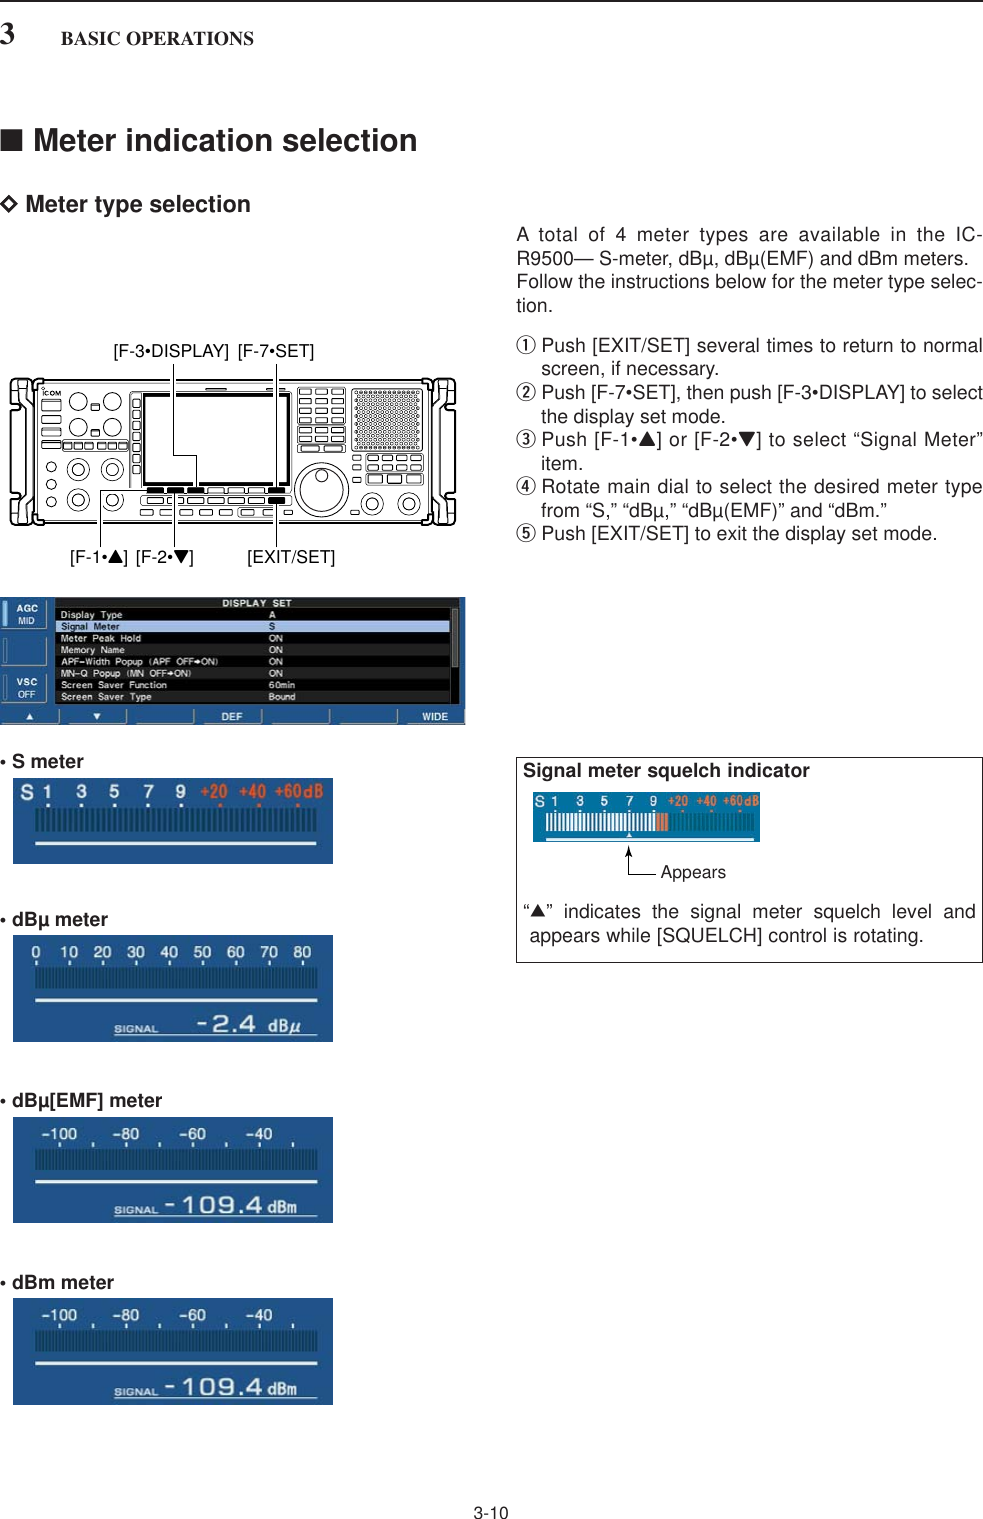 ■Meter indication selectionDMeter type selectionA total of 4 meter types are available in the IC-R9500— S-meter, dBµ, dBµ(EMF) and dBm meters. Follow the instructions below for the meter type selec-tion.qPush [EXIT/SET] several times to return to normalscreen, if necessary.wPush [F-7•SET], then push [F-3•DISPLAY] to selectthe display set mode.ePush [F-1•Y] or [F-2•Z] to select “Signal Meter”item.rRotate main dial to select the desired meter typefrom “S,” “dBµ,” “dBµ(EMF)” and “dBm.”tPush [EXIT/SET] to exit the display set mode.• S meter• dBµ meter• dBµ[EMF] meter• dBm meter[F-1•Y] [F-2•Z] [EXIT/SET][F-7•SET][F-3•DISPLAY]3-103BASIC OPERATIONSSignal meter squelch indicator“∫” indicates the signal meter squelch level andappears while [SQUELCH] control is rotating.Appears